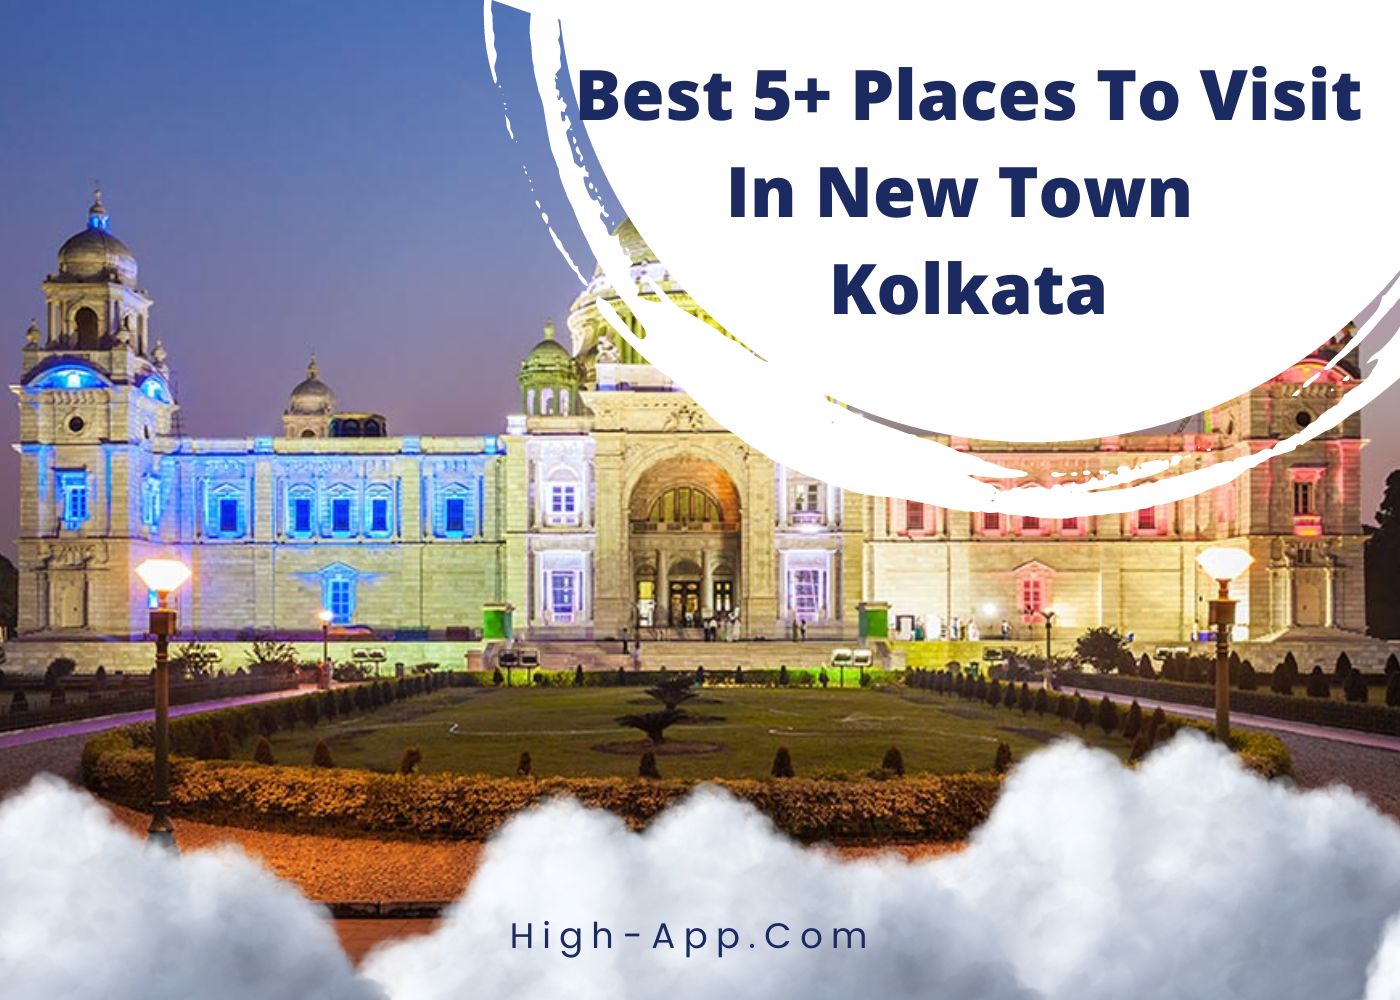 Best 5+ Places To Visit In New Town Kolkata